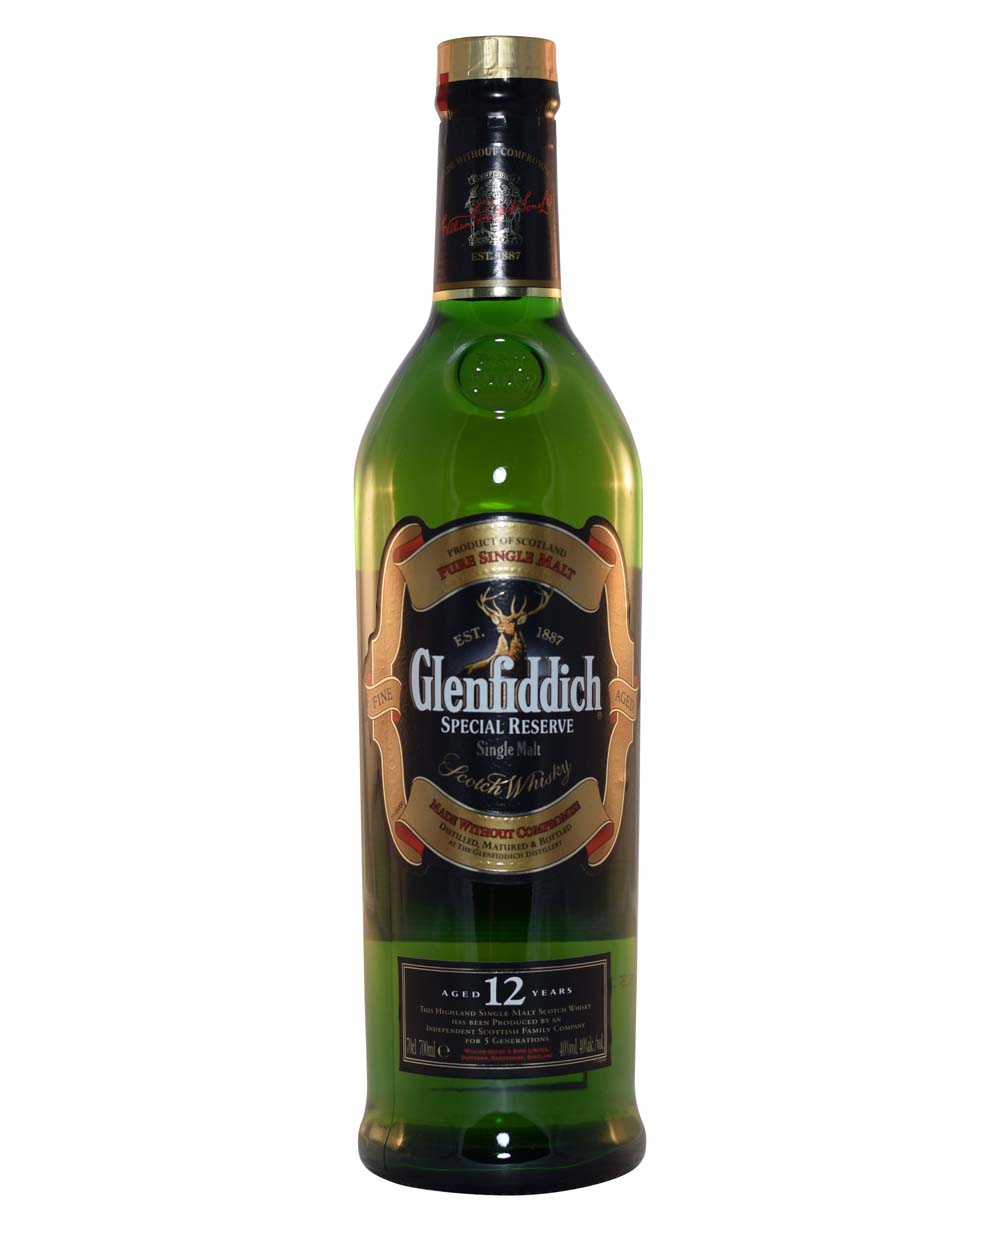 Glenfiddich Special Reserve (12 Years Old) Musthave Malts MHM